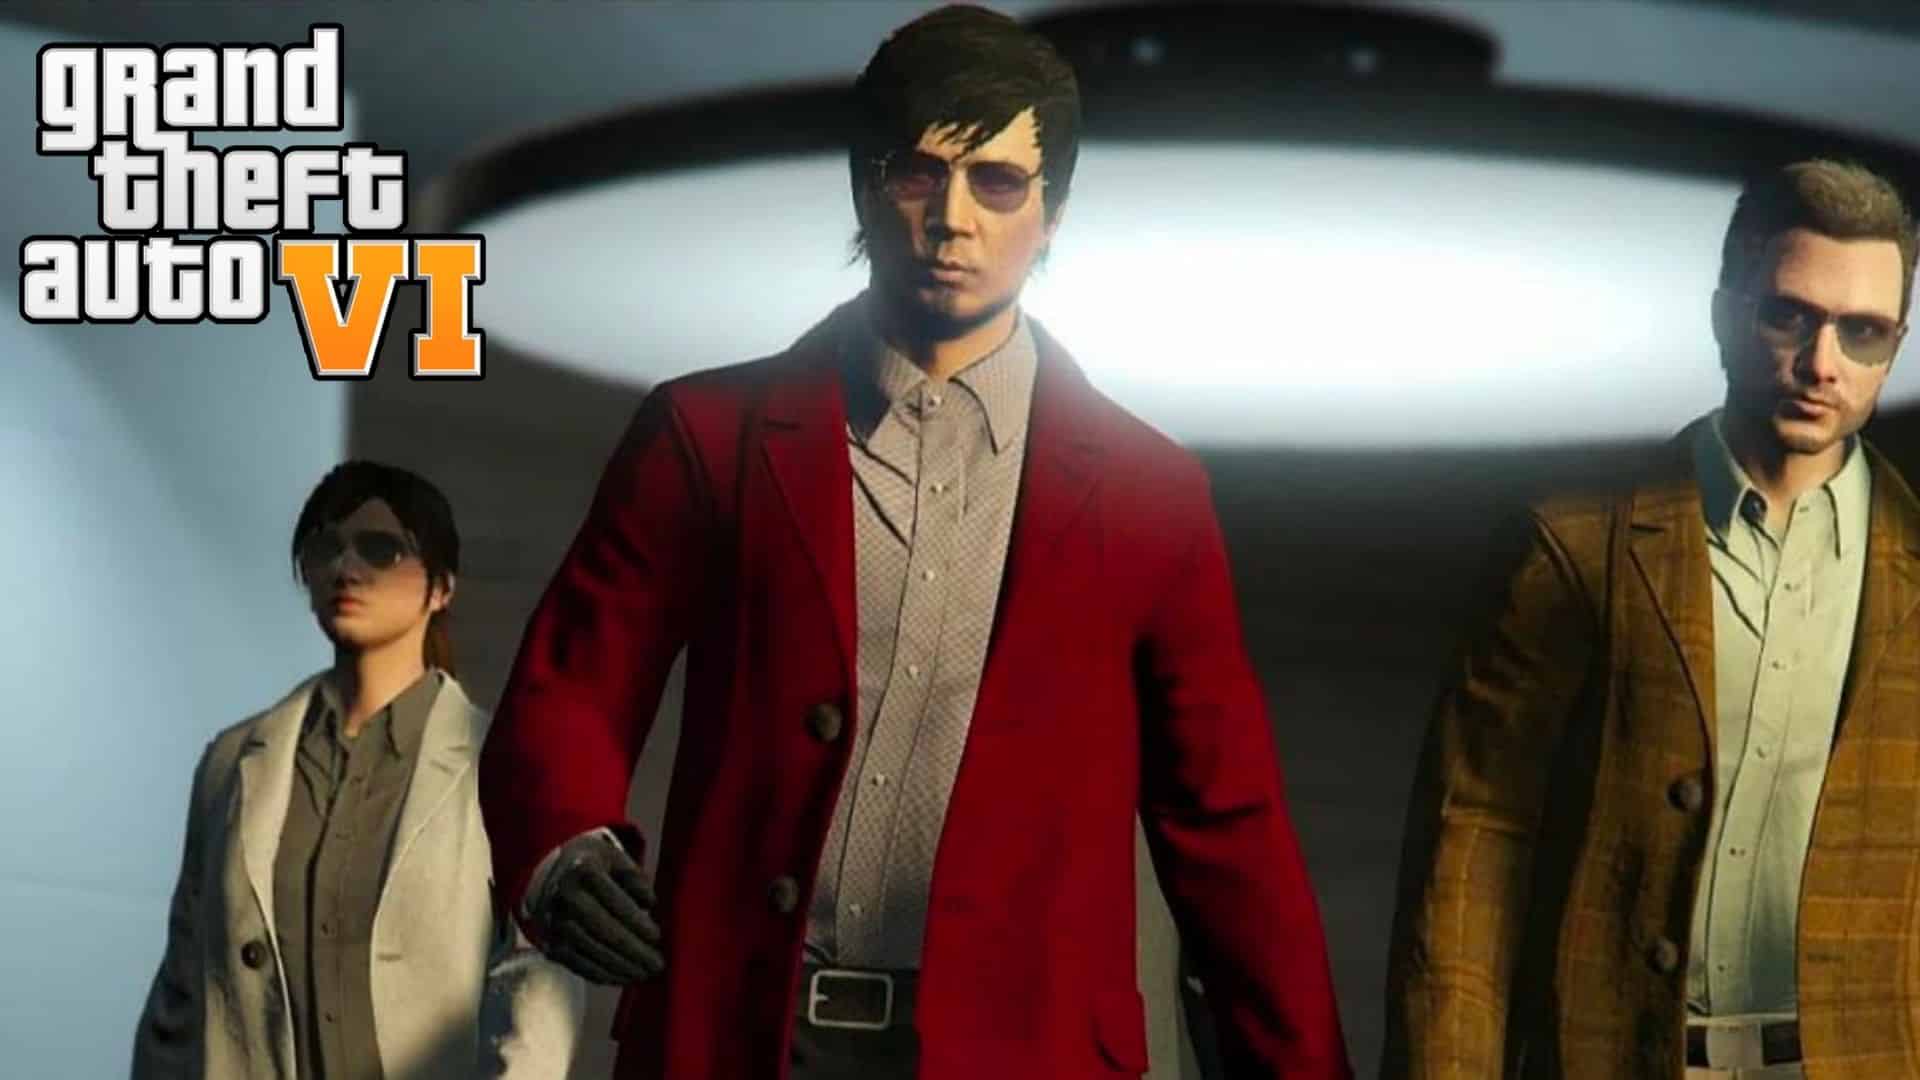 GTA Online characters in suits walking towards screen with GTA 6 logo